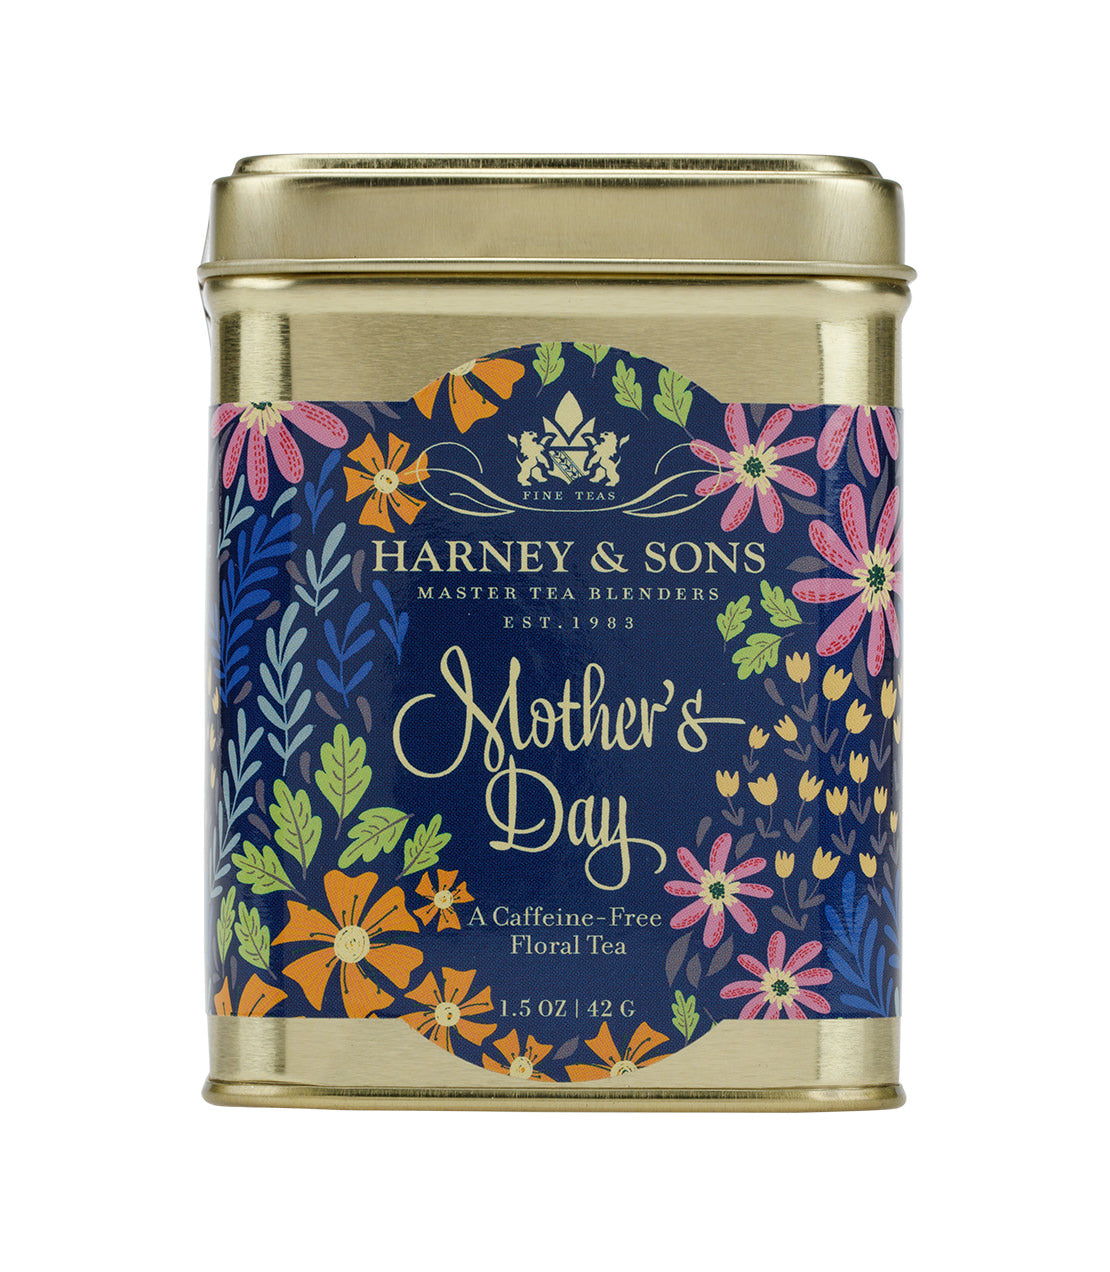 Mother's Day - Loose 1.5 oz. Tin - Harney & Sons Fine Teas